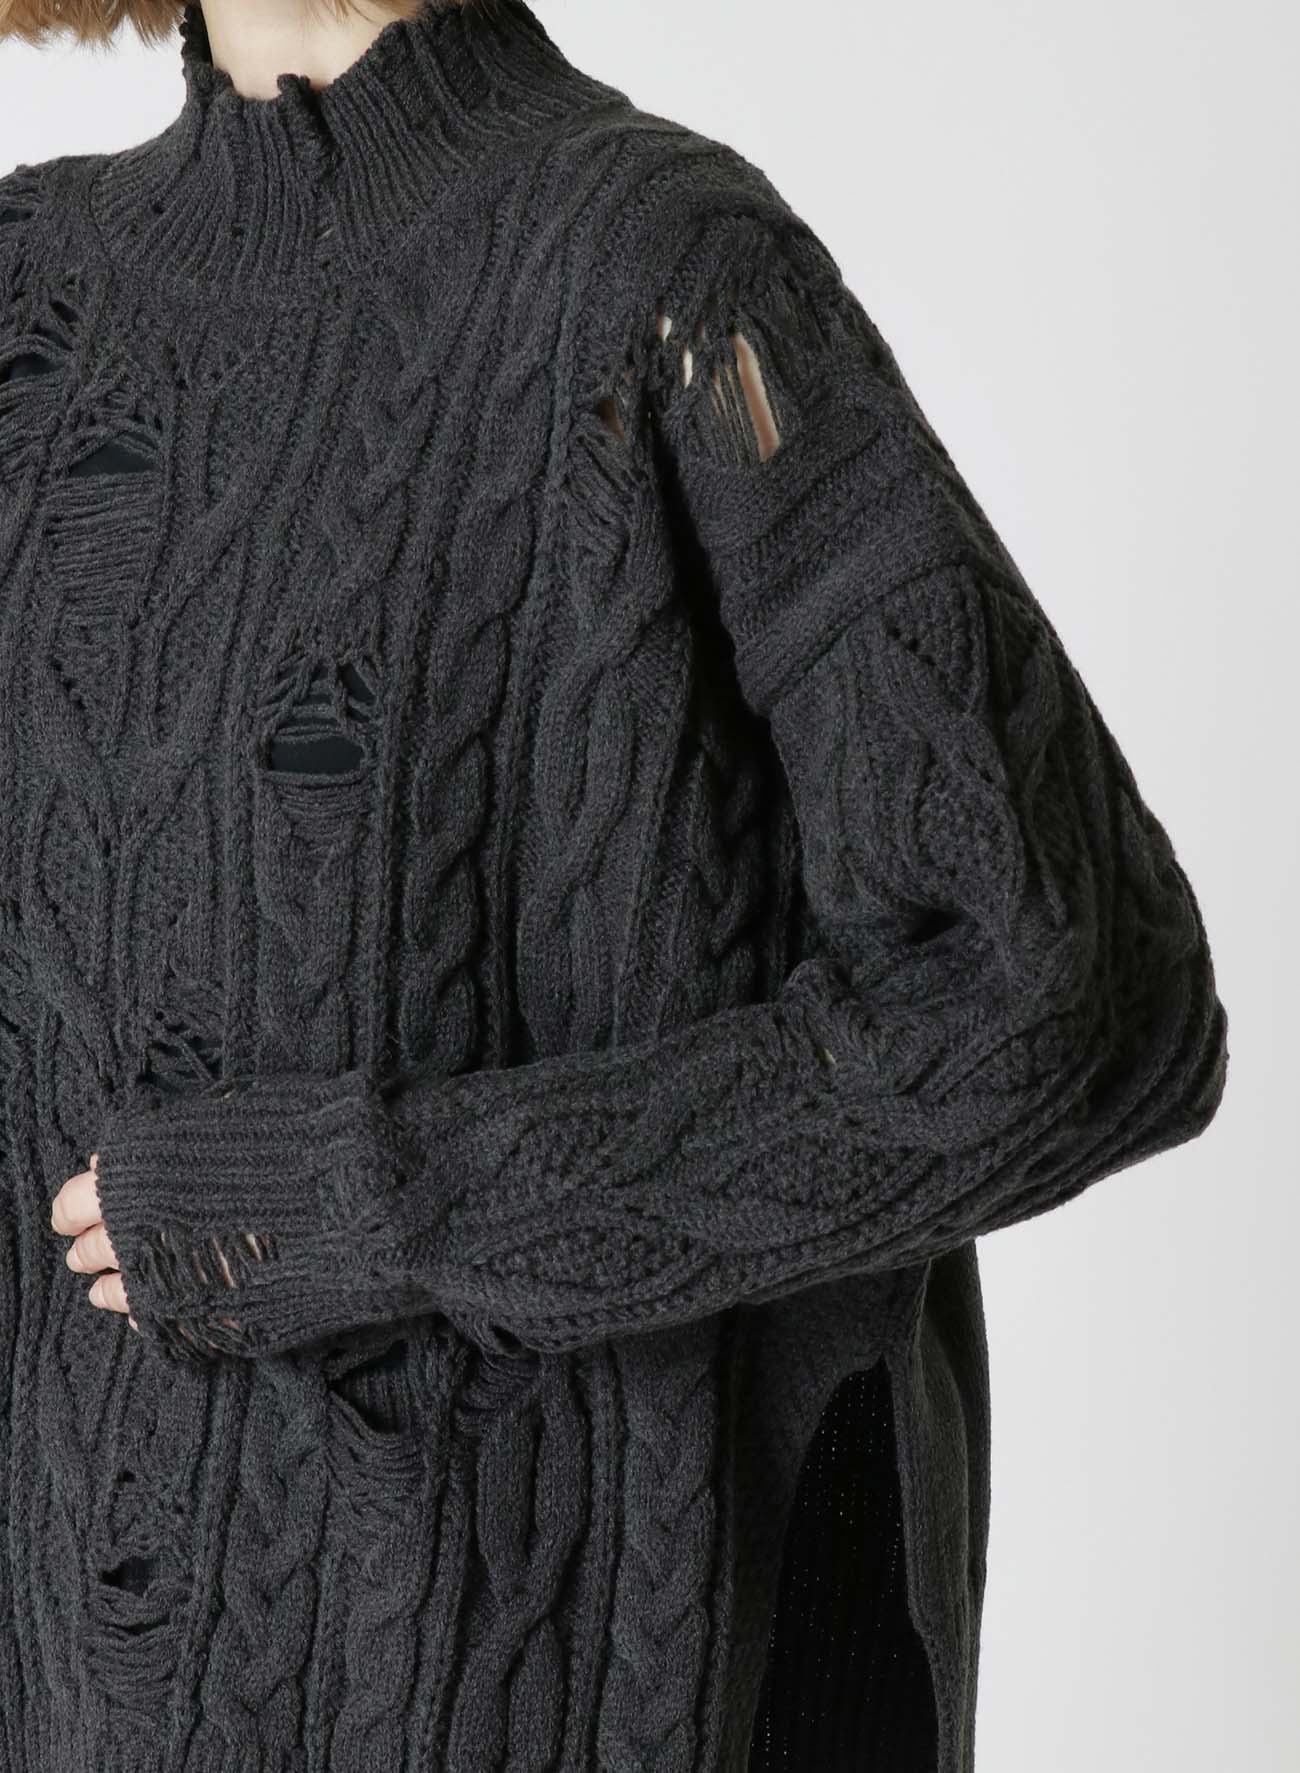 ACRYLIC WOOL RIPPED ARAN KNIT OVERSIZED PULLOVER